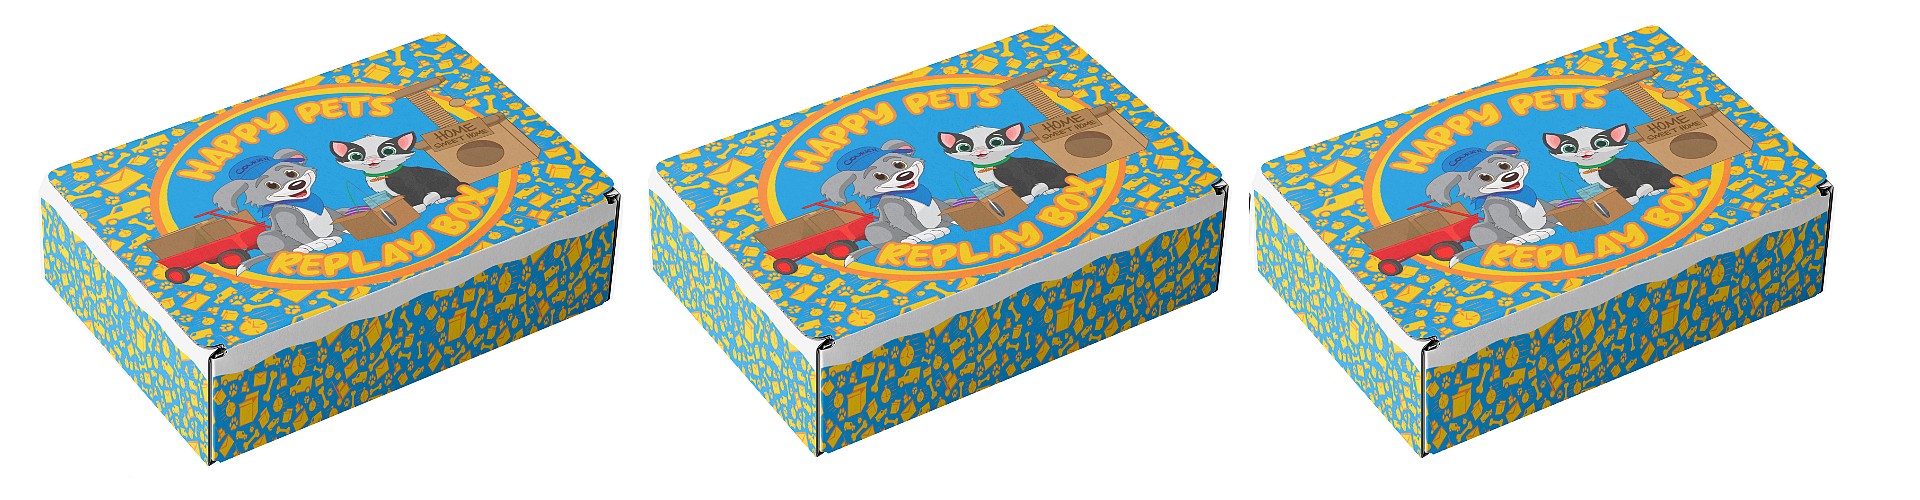 happy pets replay box monthly subscription plan box za pse